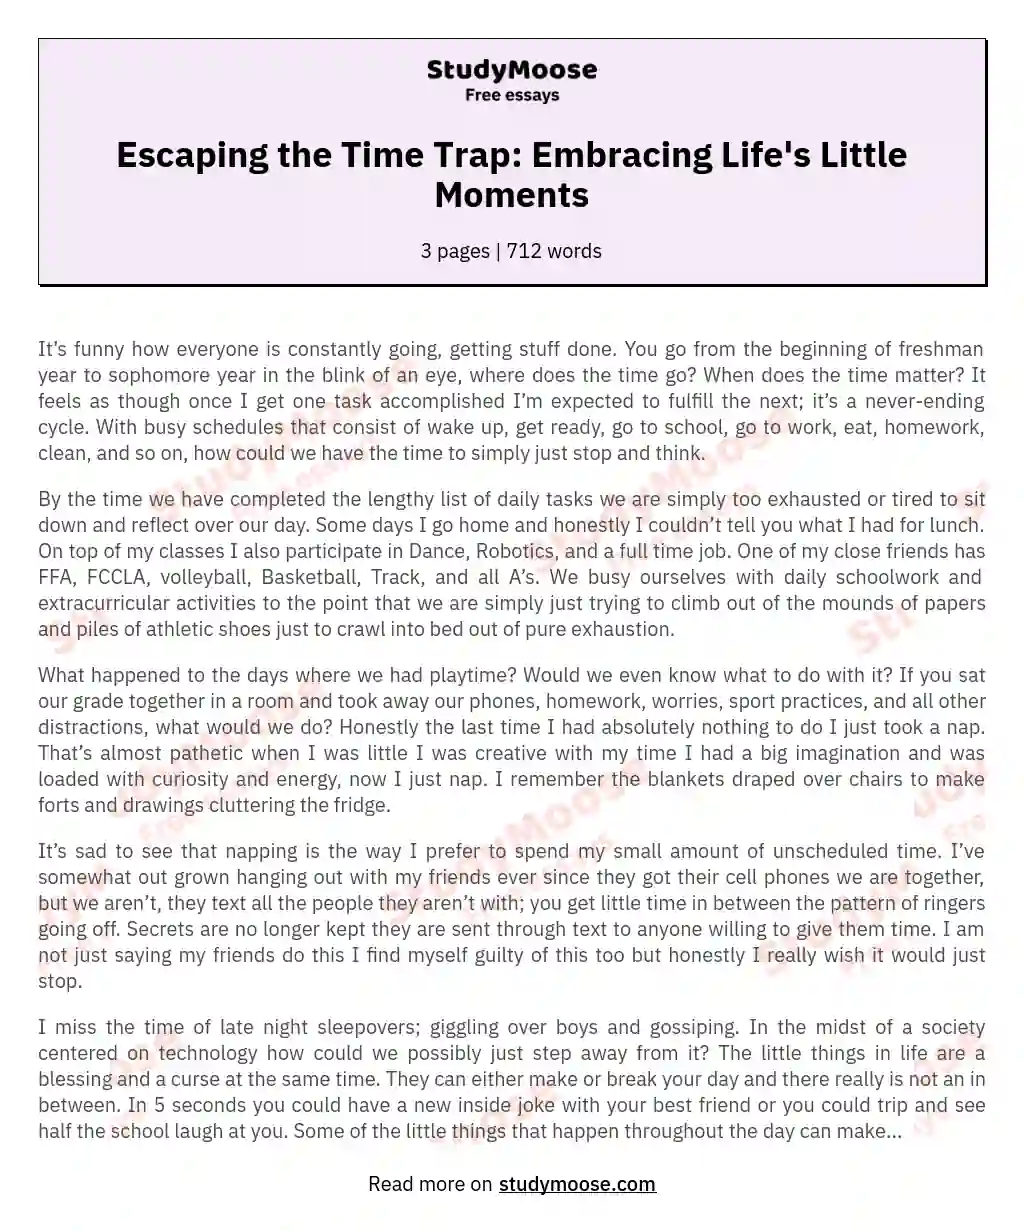 Escaping the Time Trap: Embracing Life's Little Moments essay